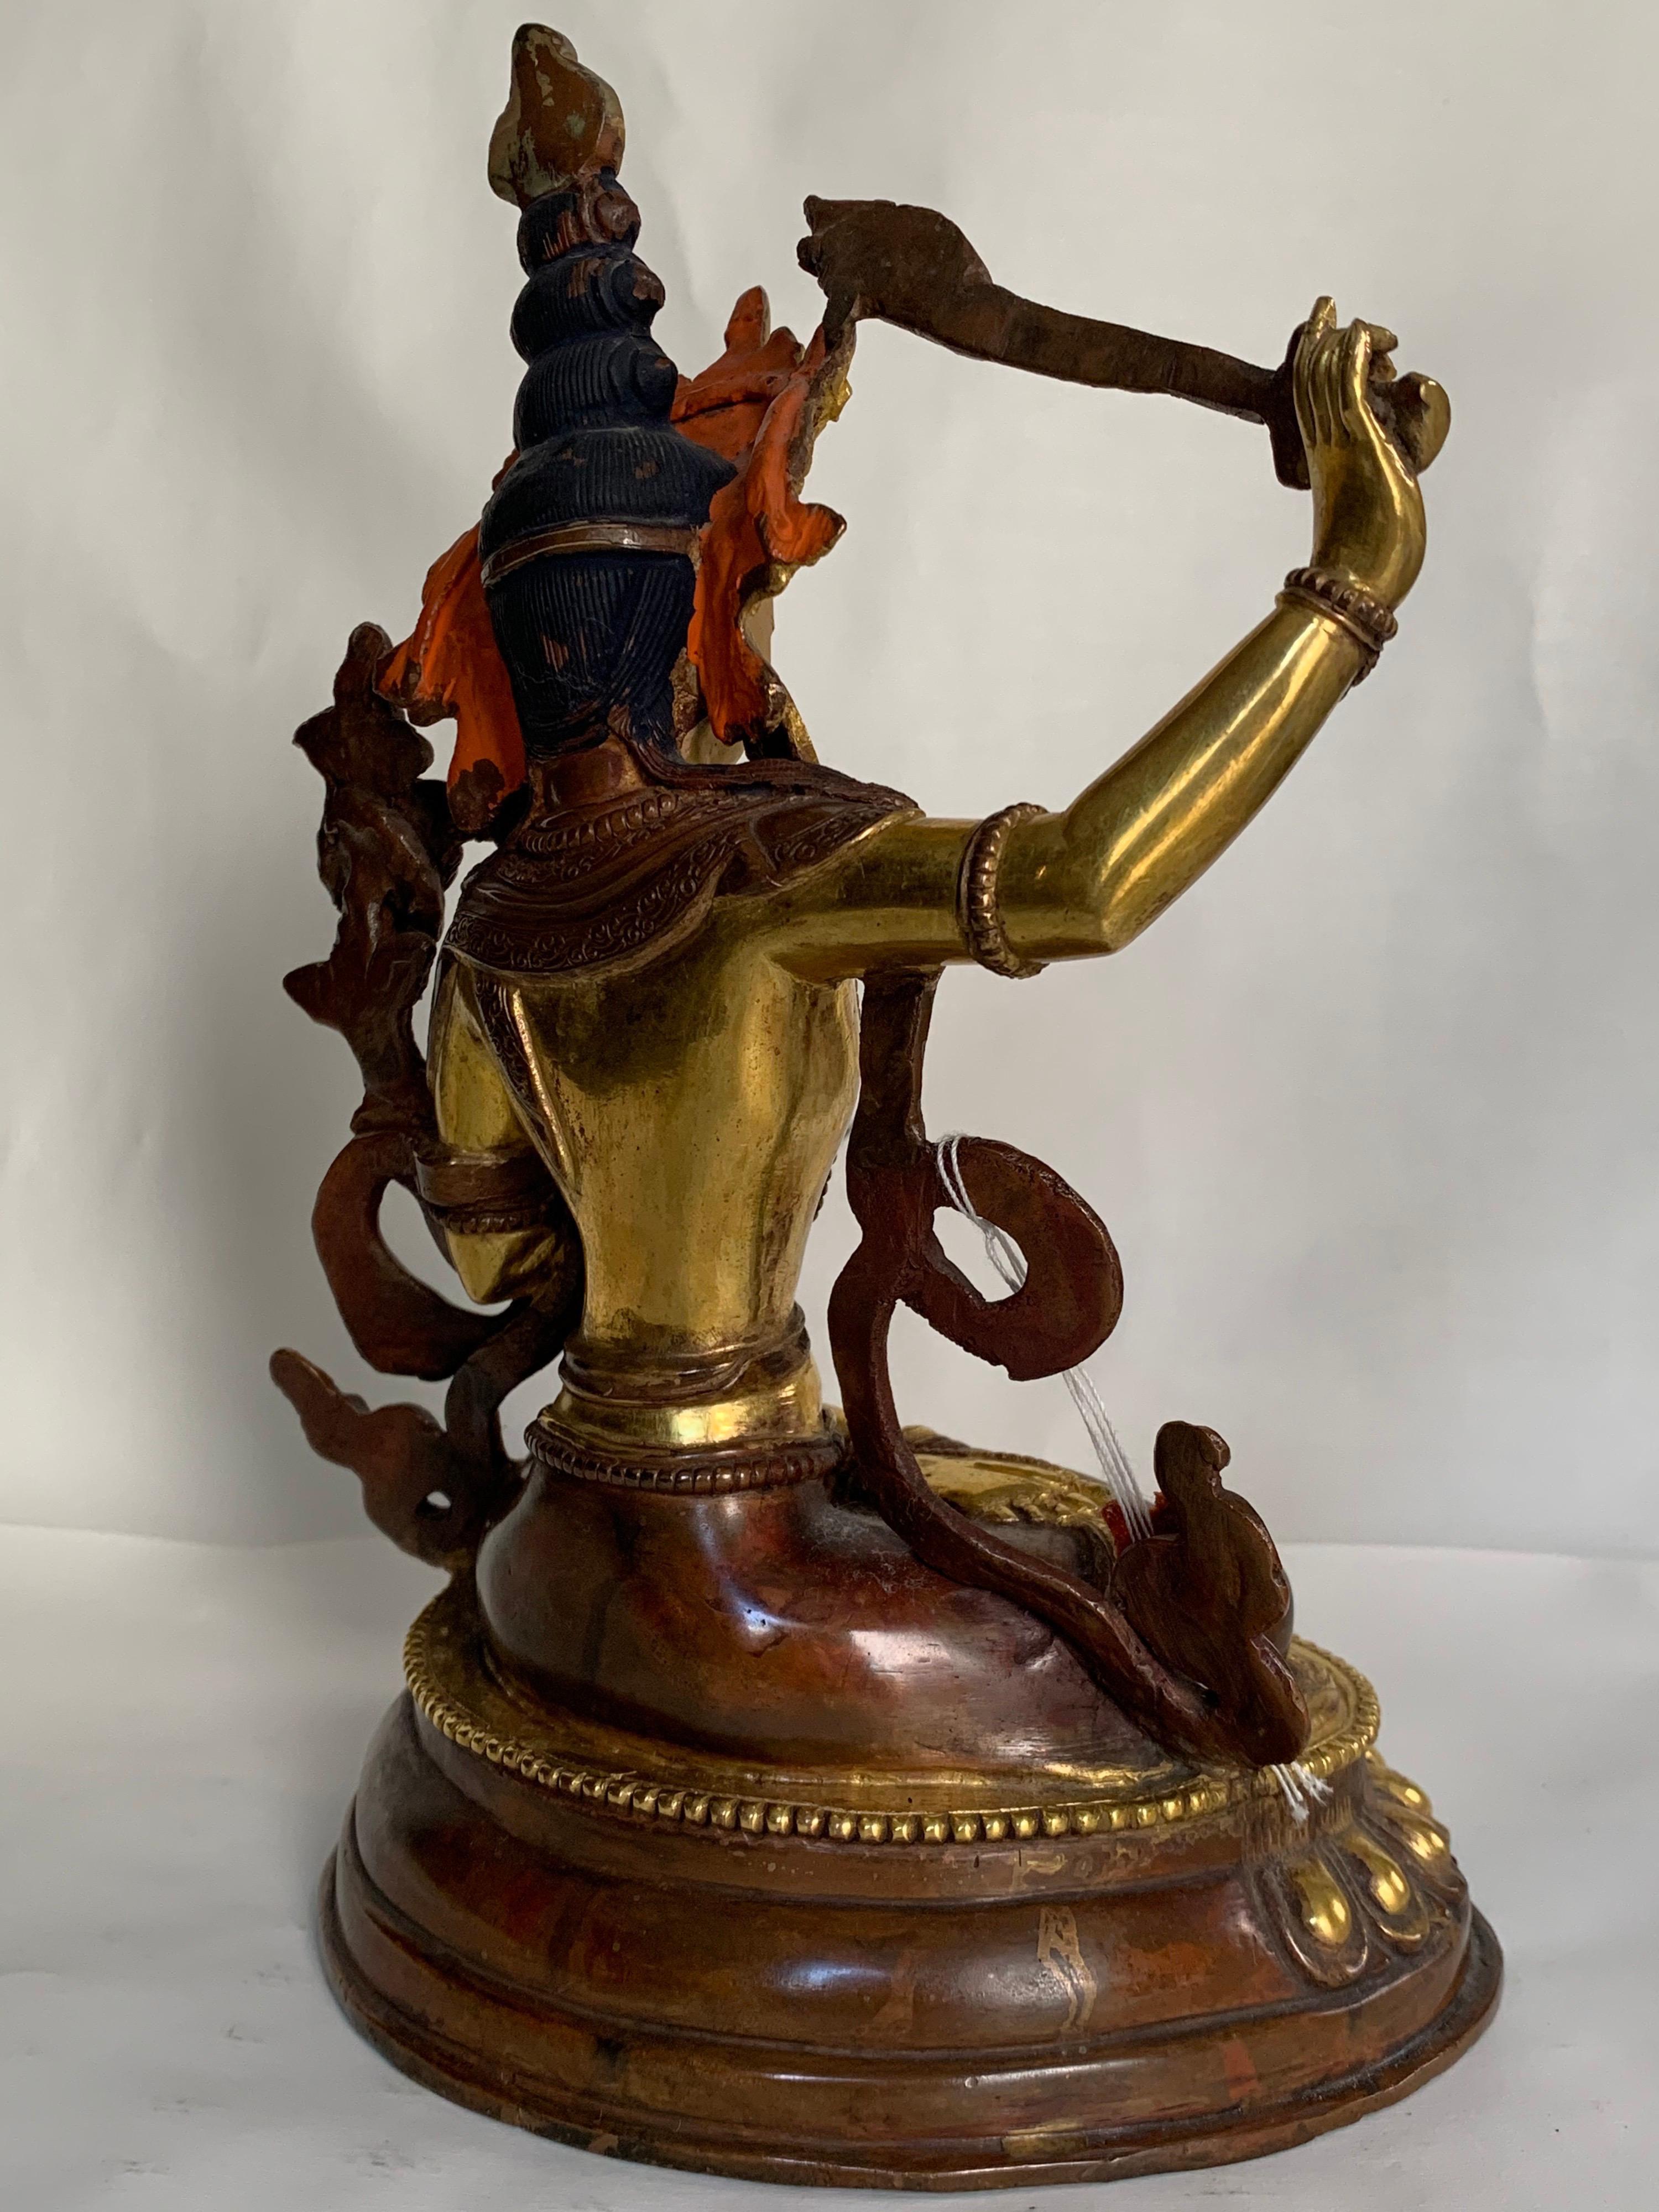 Manjushree Statue 9 Inch with 24K Gold Handcrafted by Lost Wax Process - Other Art Style Sculpture by Unknown